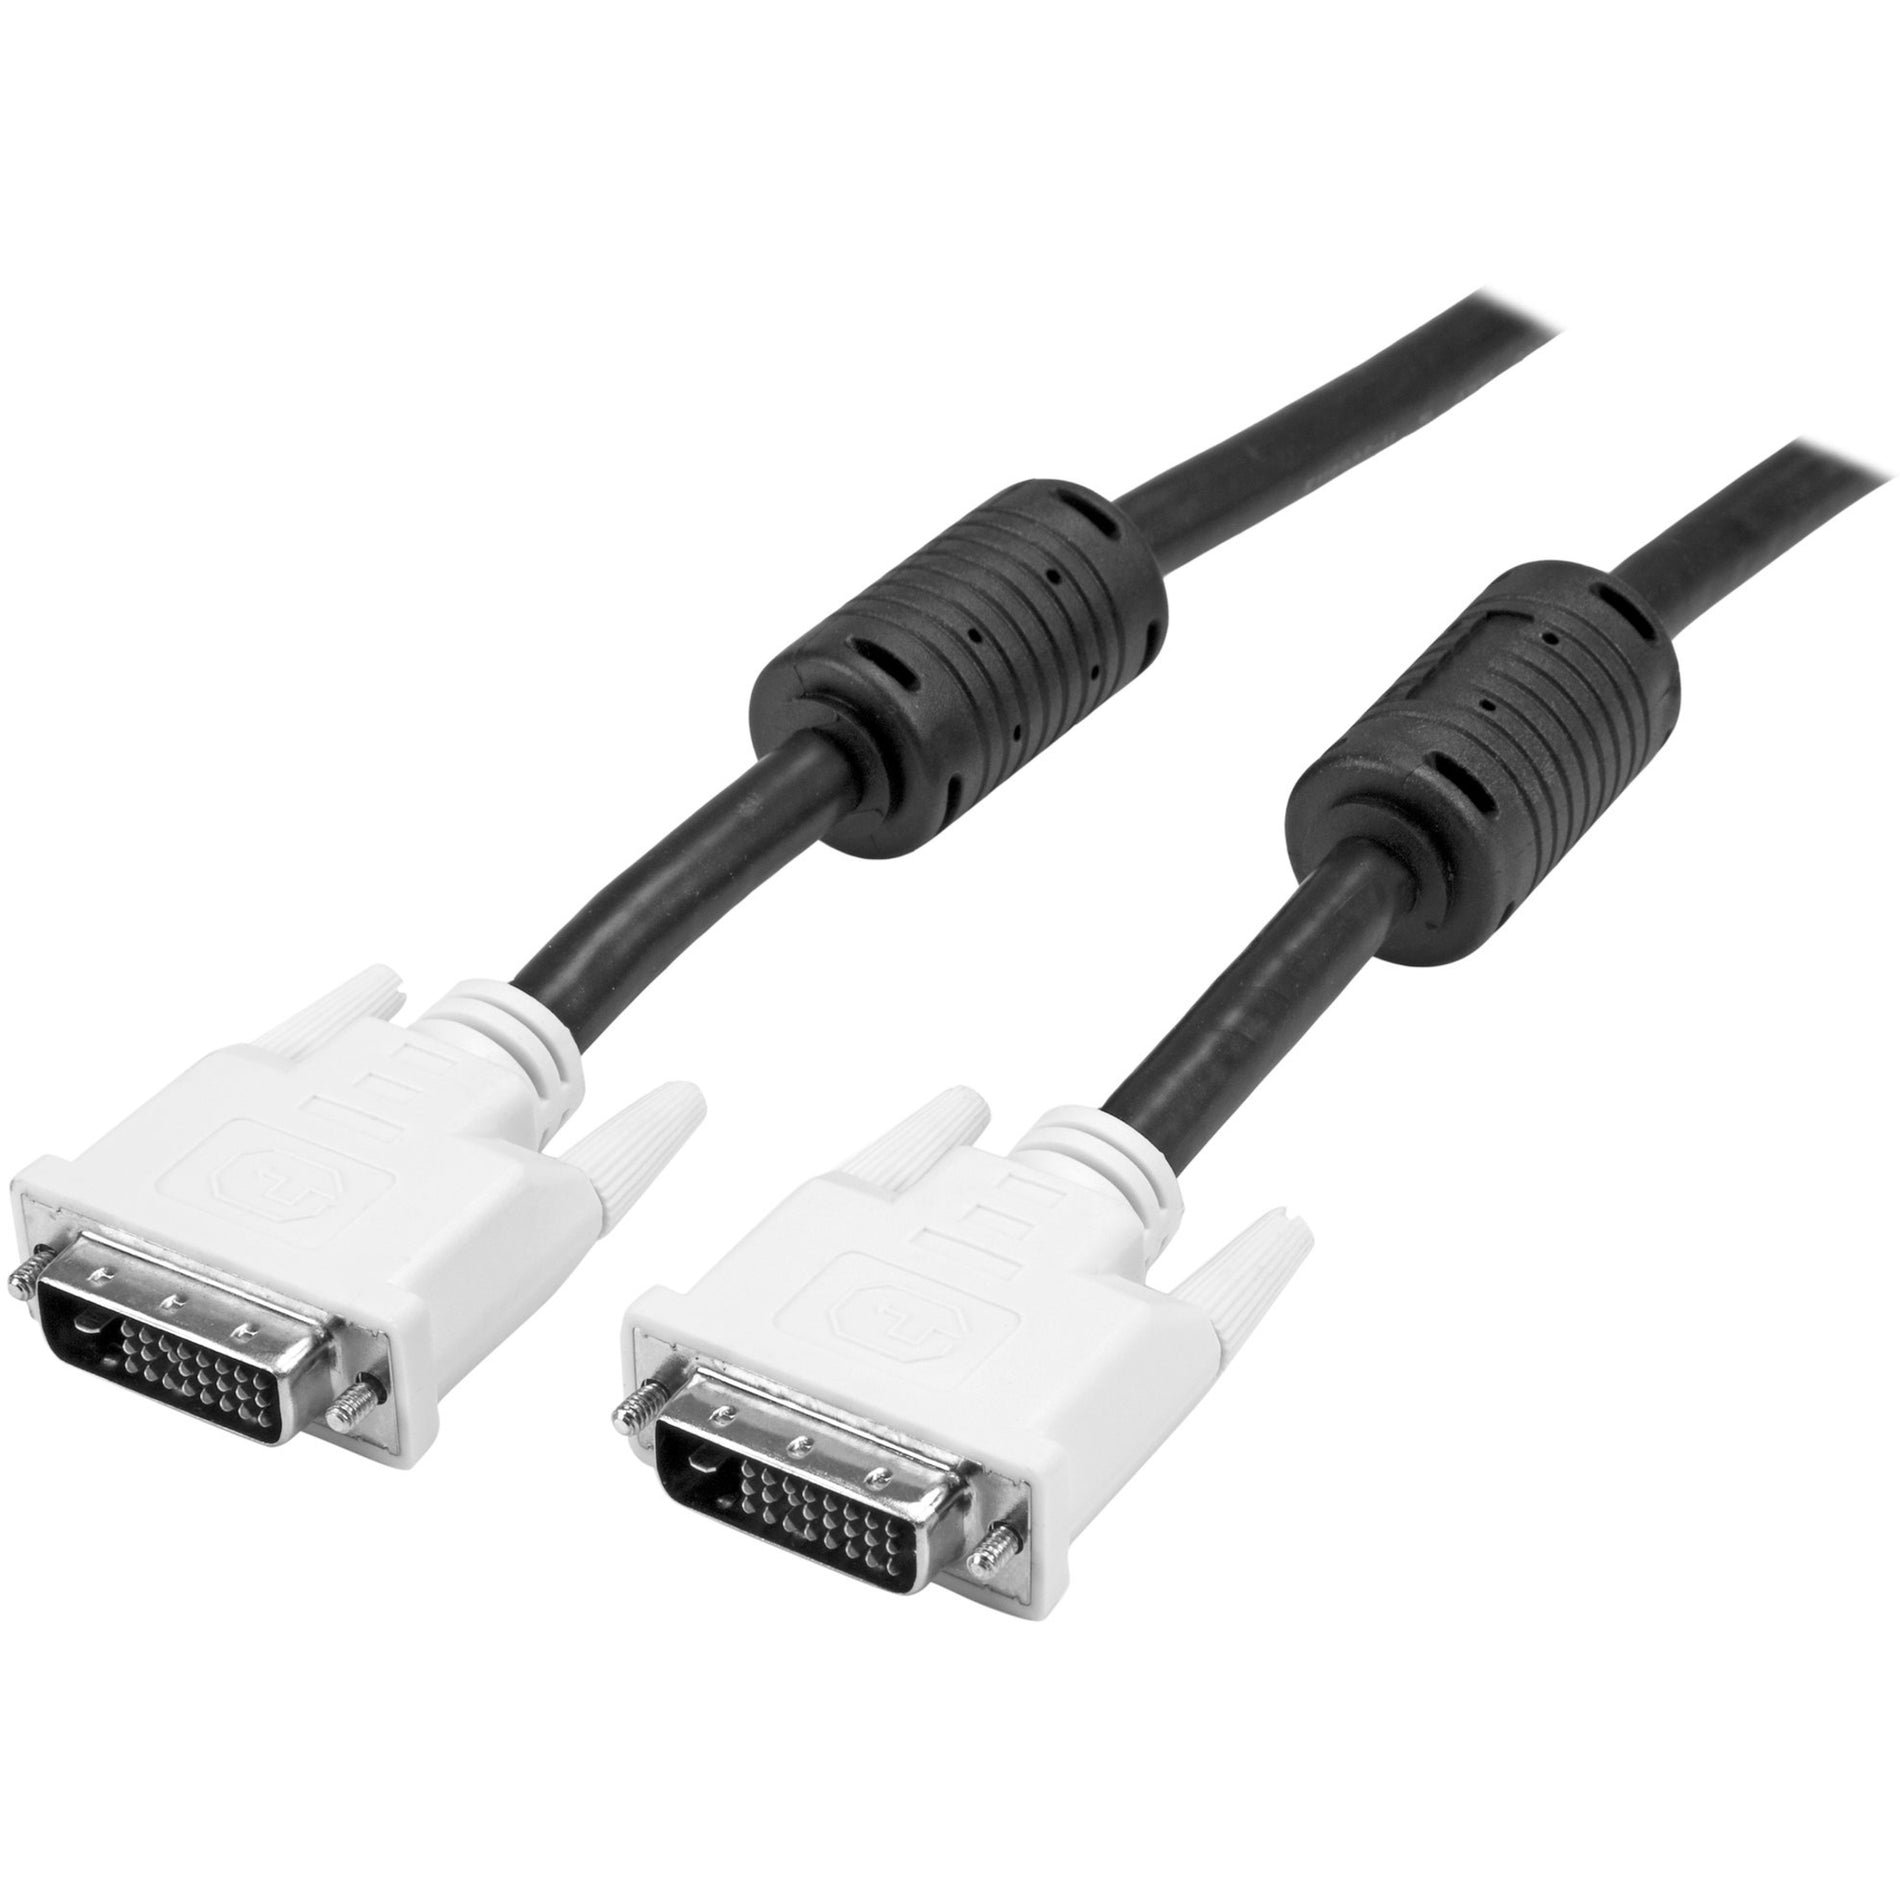 StarTech.com DVIDDMM10 10 ft DVI-D Dual Link Cable - M/M, High-Speed Video Cable for Monitors, Projectors, HDTVs